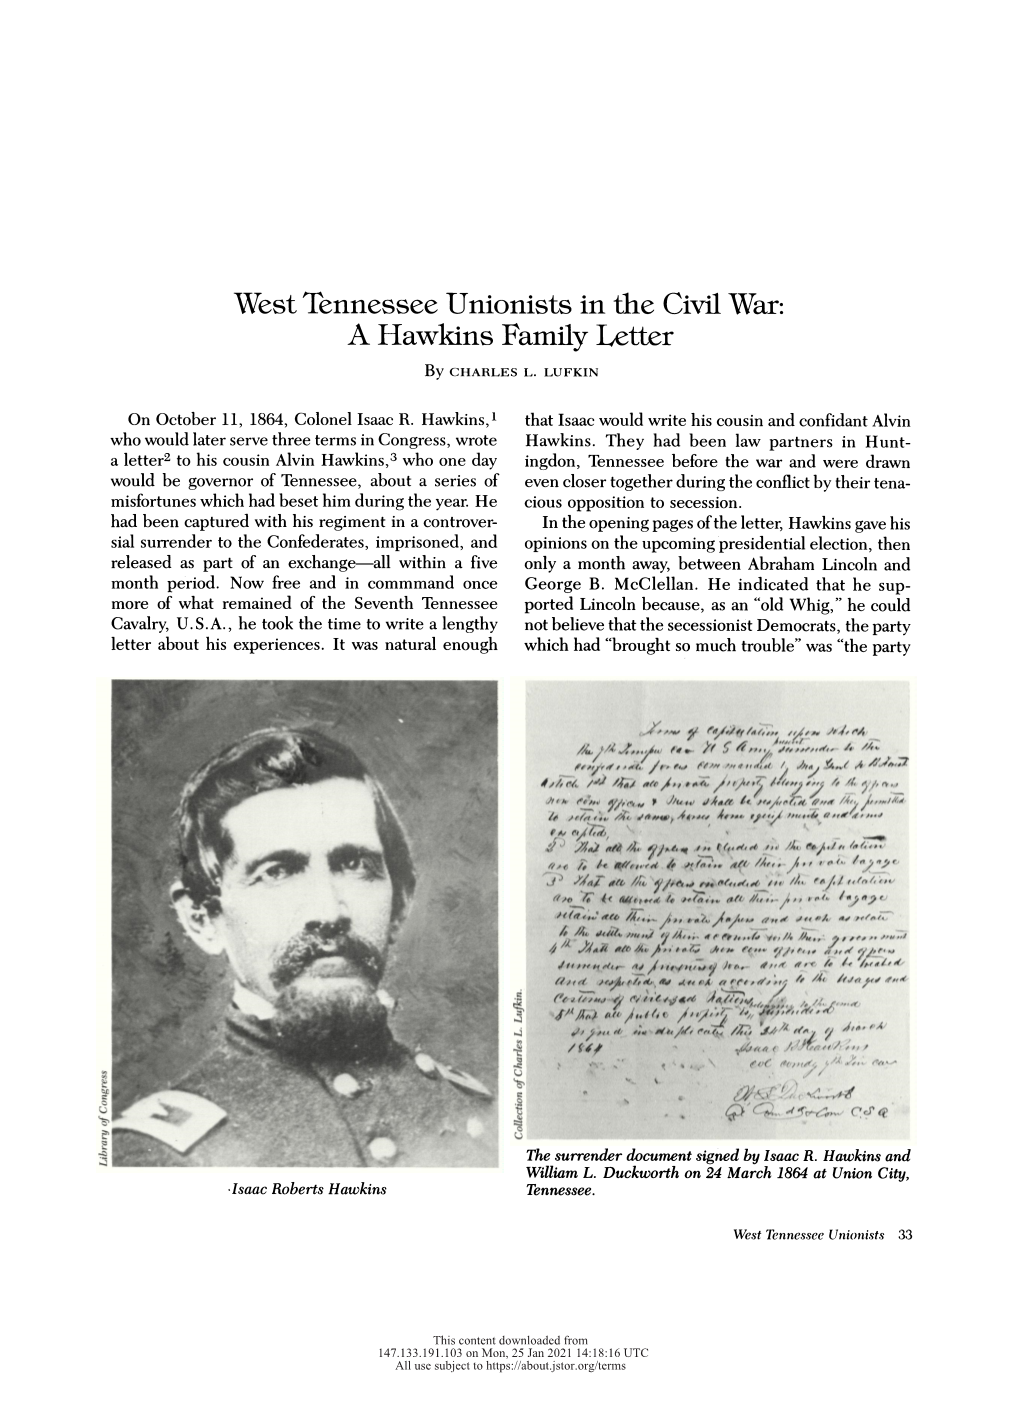 West Tennessee Unionists in the Civil War: a Hawkins Family Letter